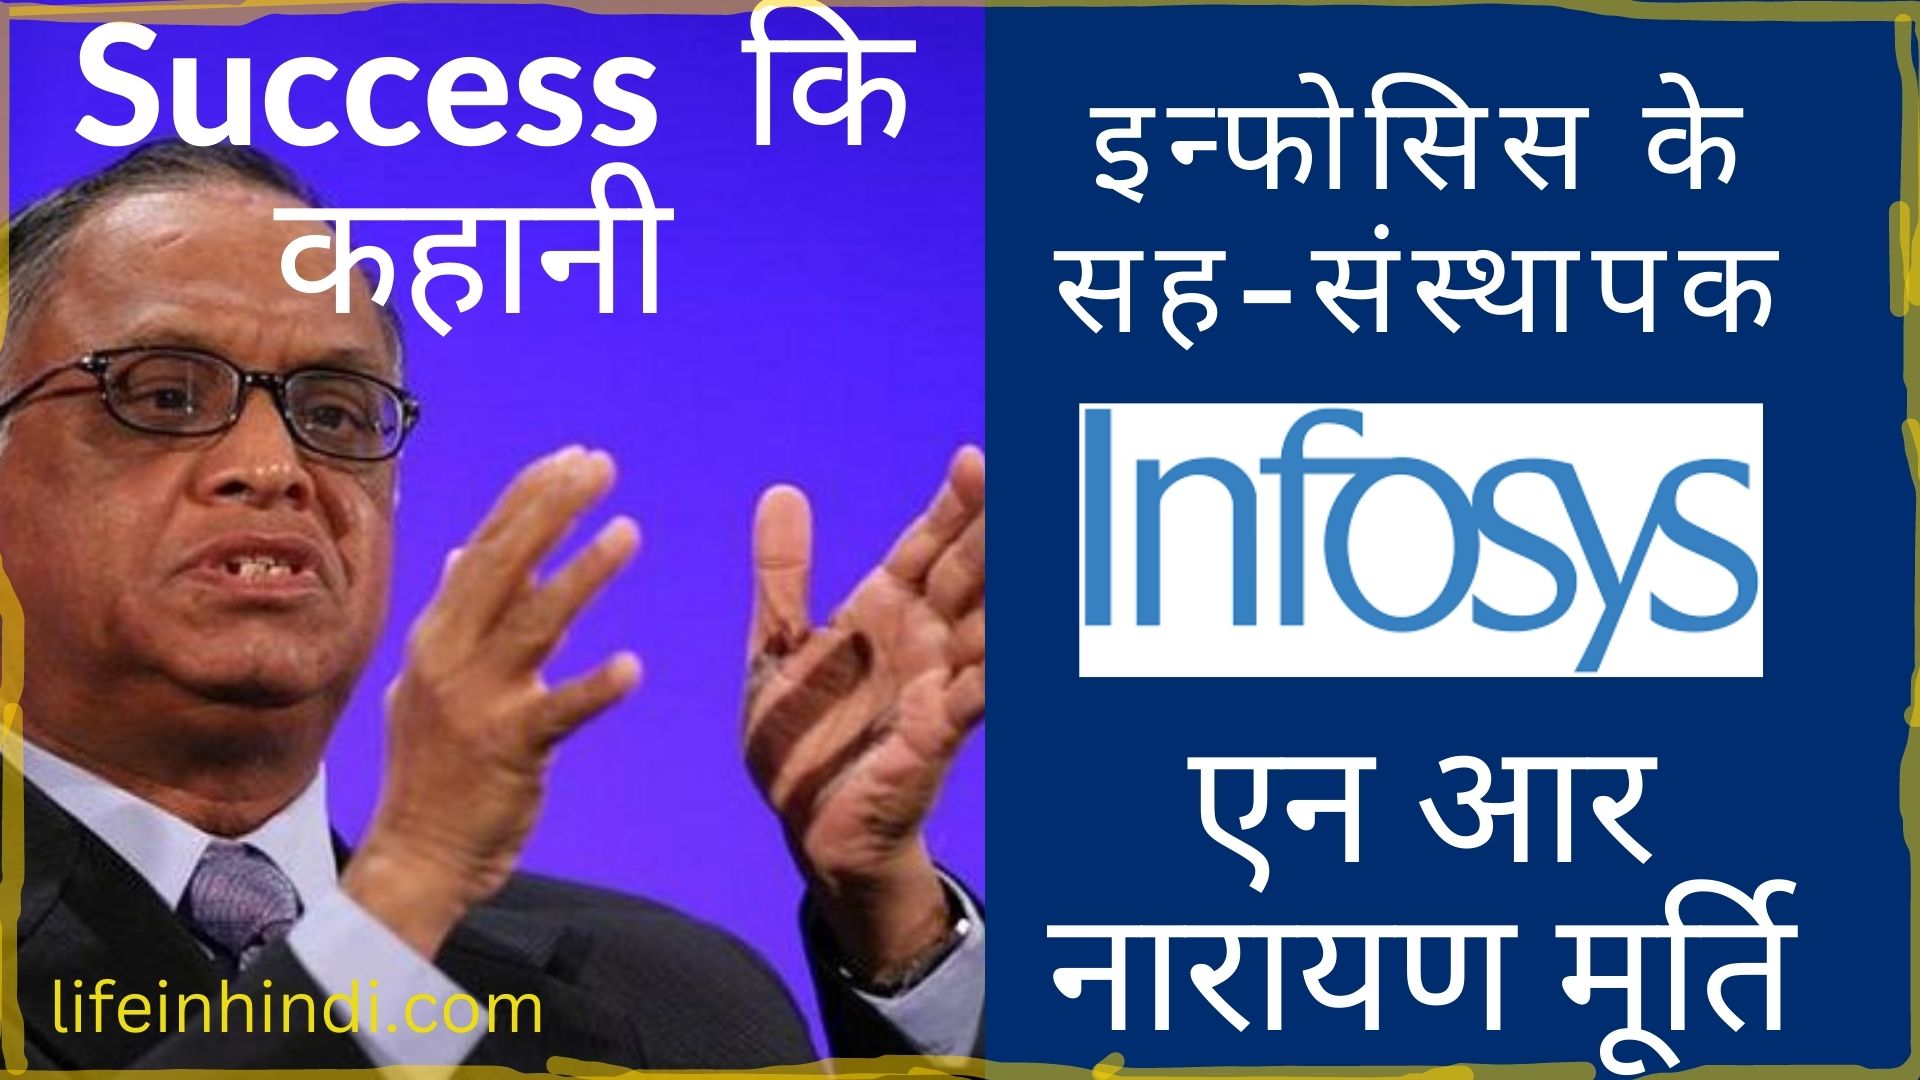 N.R. Narayan Murthy-Biography-Jivan Parichay-Net Worth, Doughter-Wife- Son In Low-Infosys-Bussiness-Quotes in Hindi